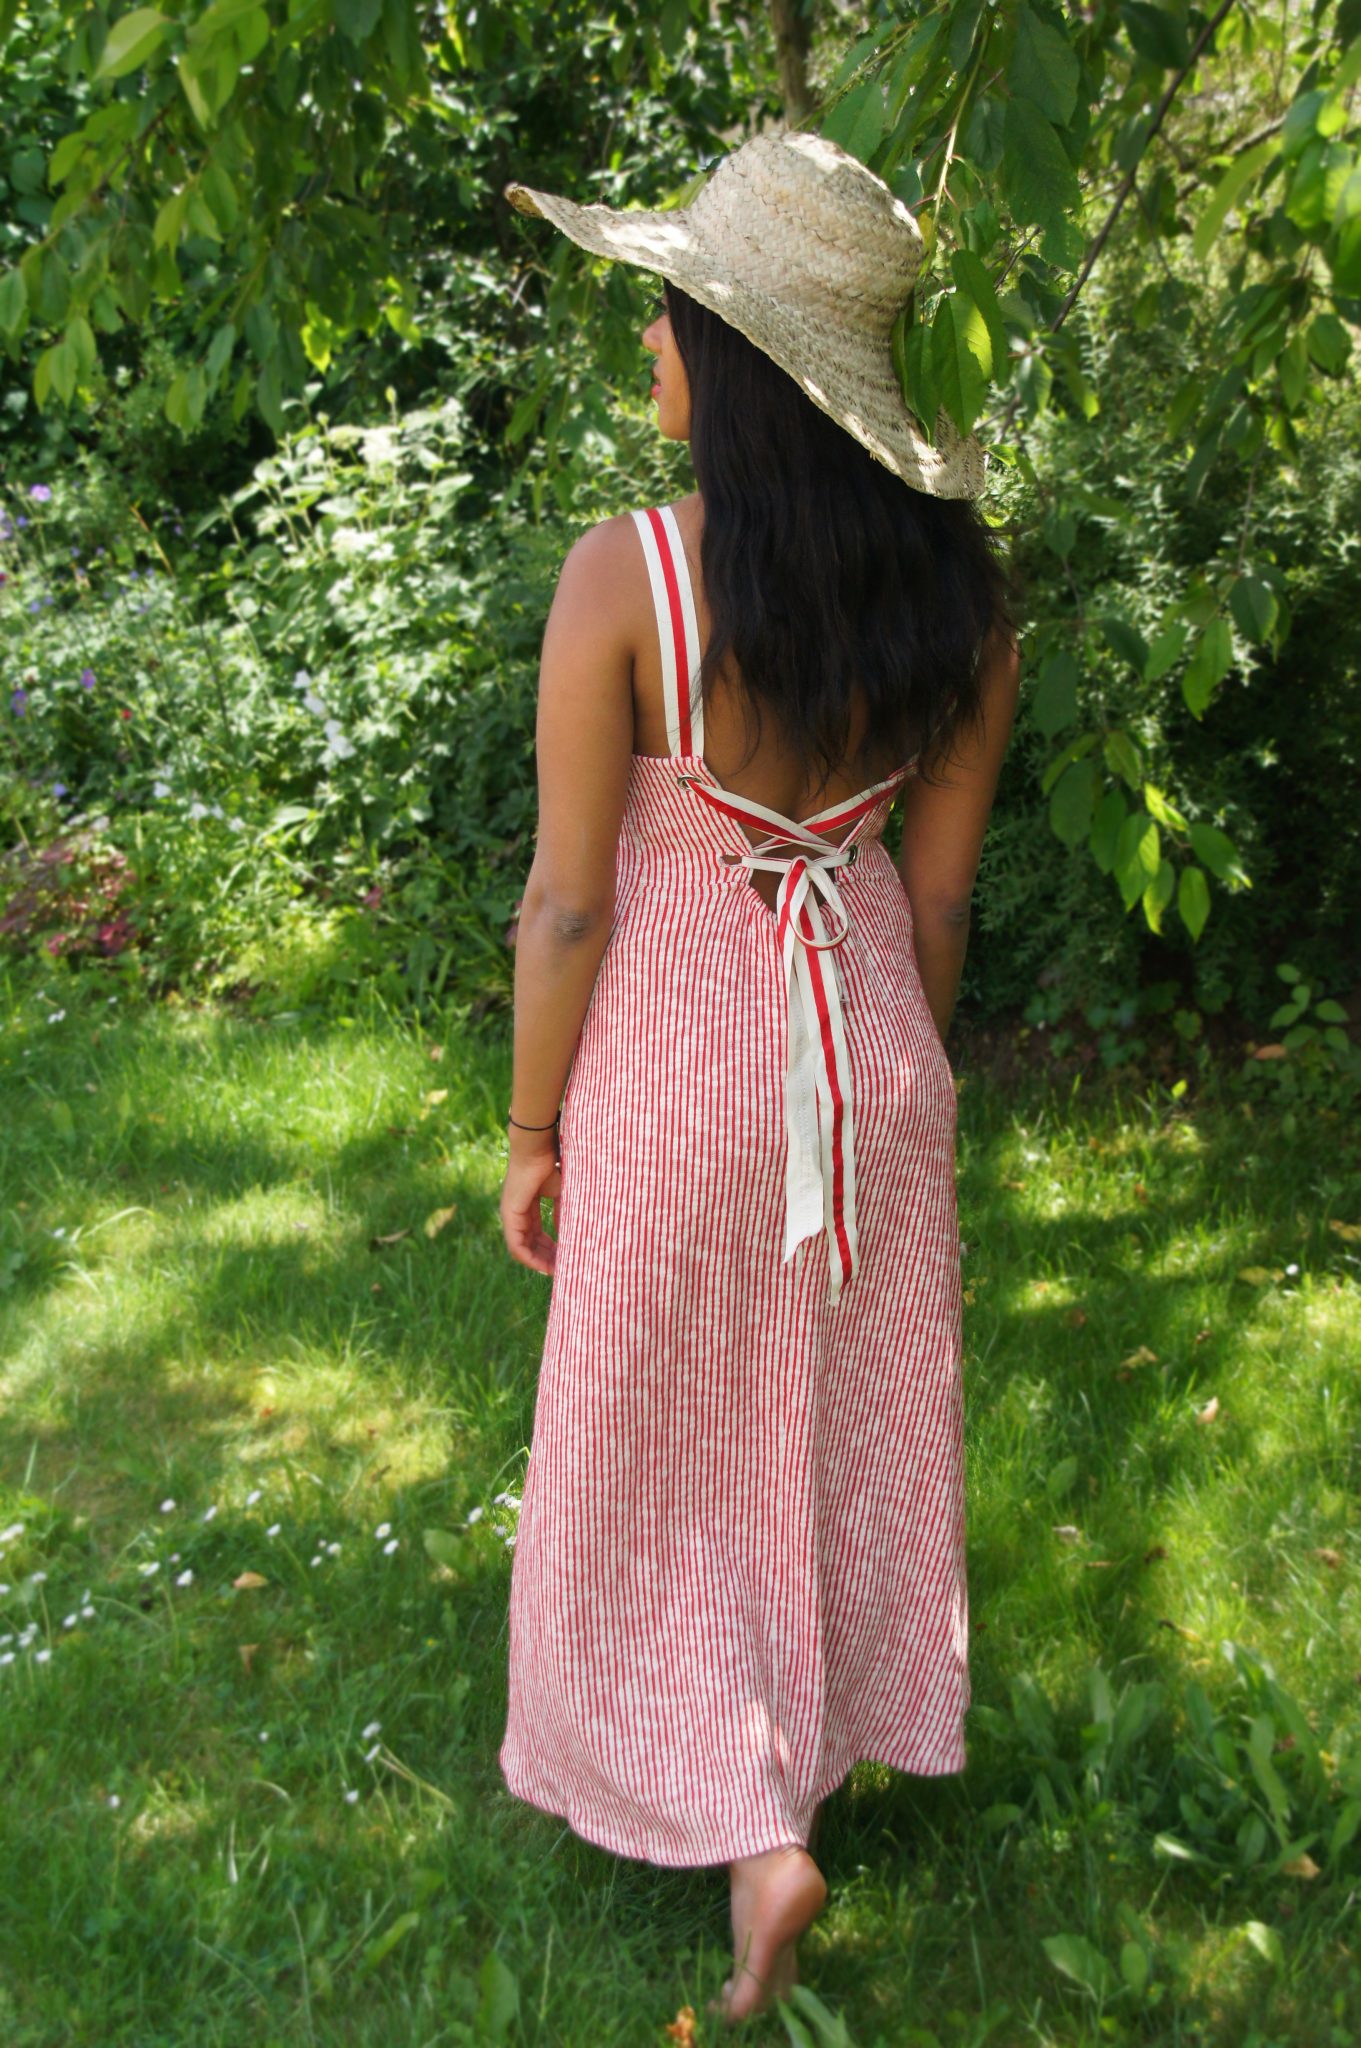 wearing a striped dress for a garden party